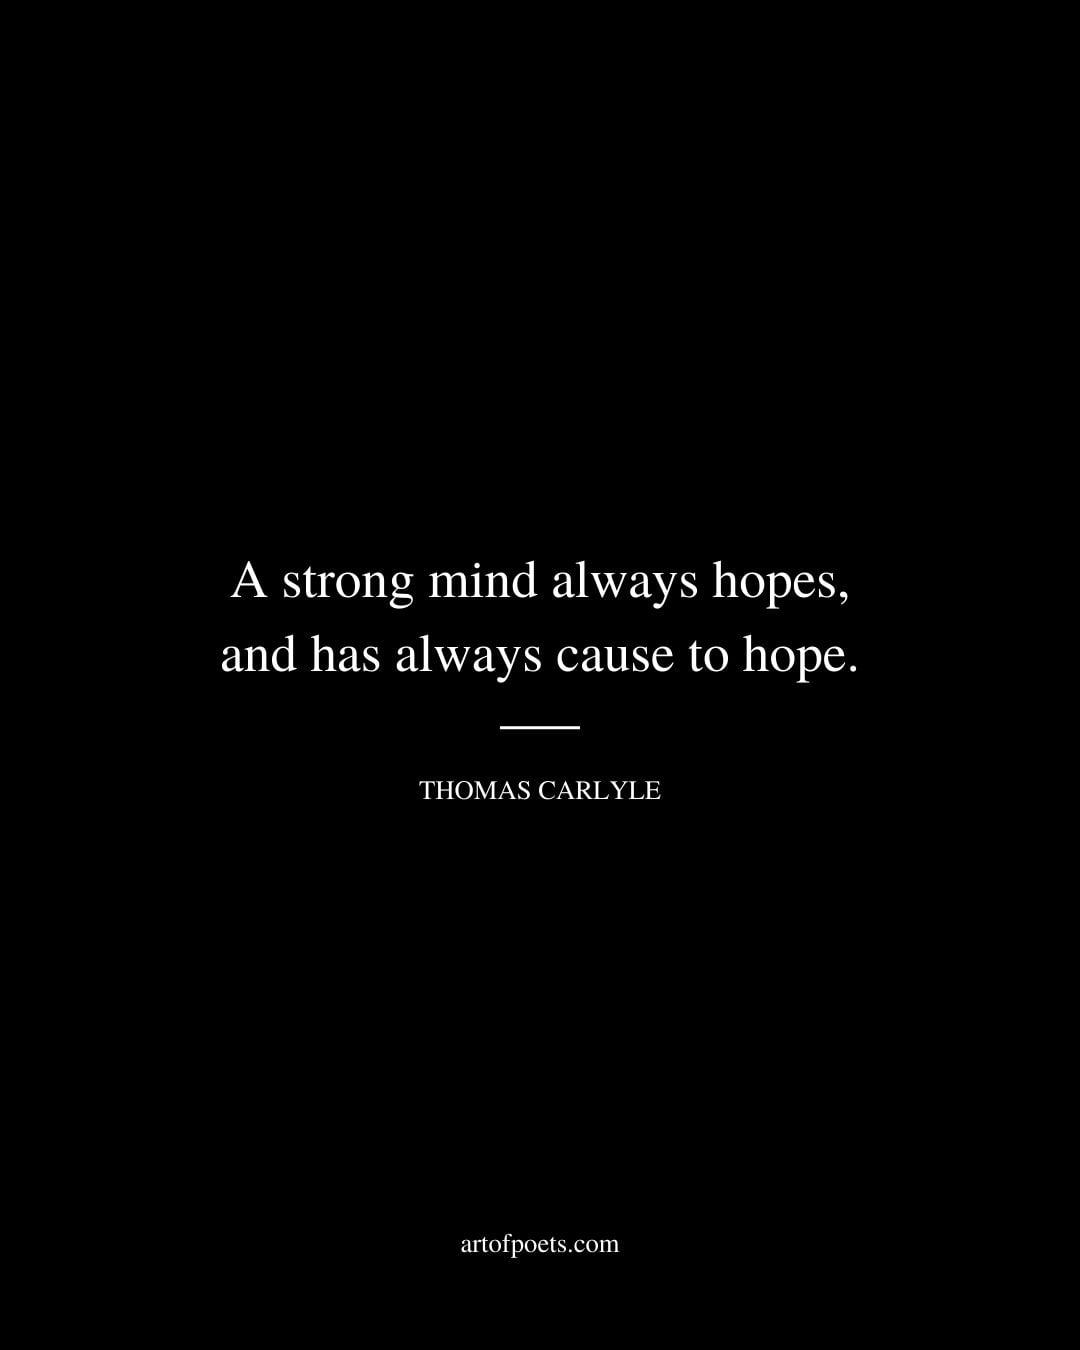 A strong mind always hopes and has always cause to hope. Thomas Carlyle